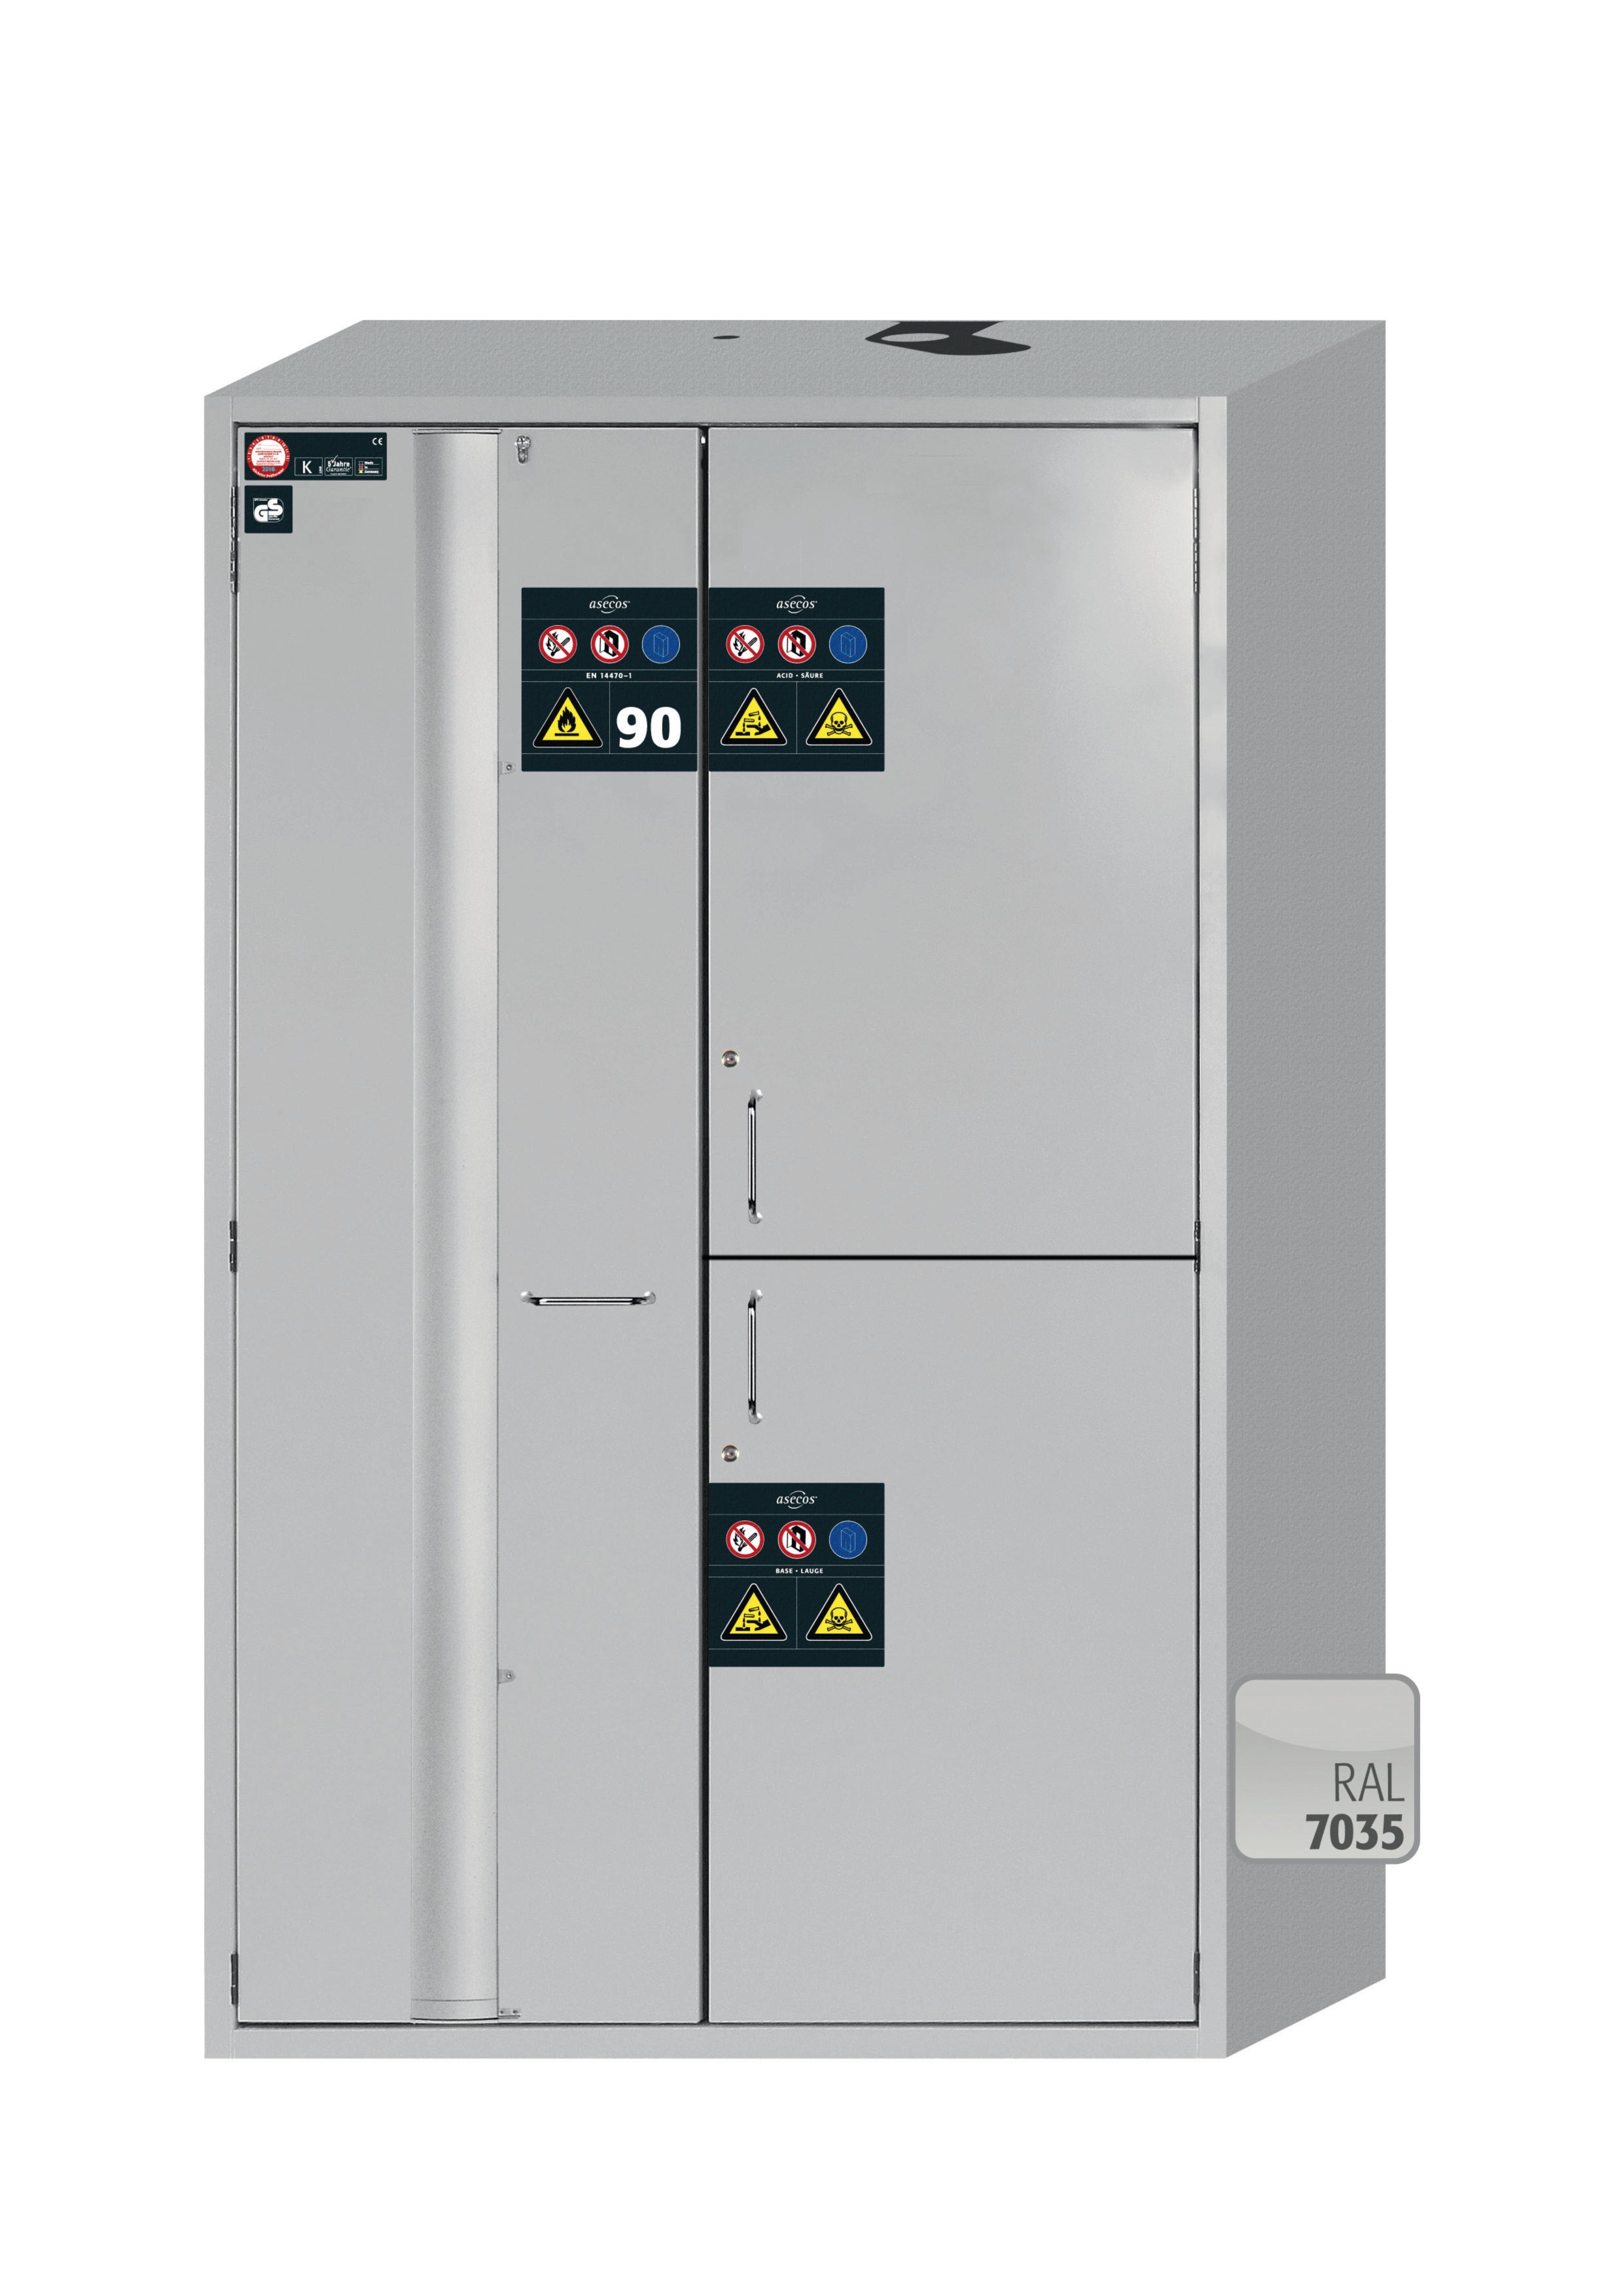 Type 90 combination safety cabinet K-PHOENIX-90 model K90.196.120.MC.FWAS in light gray RAL 7035 with 4x standard pull-out tray (stainless steel 1.4301)